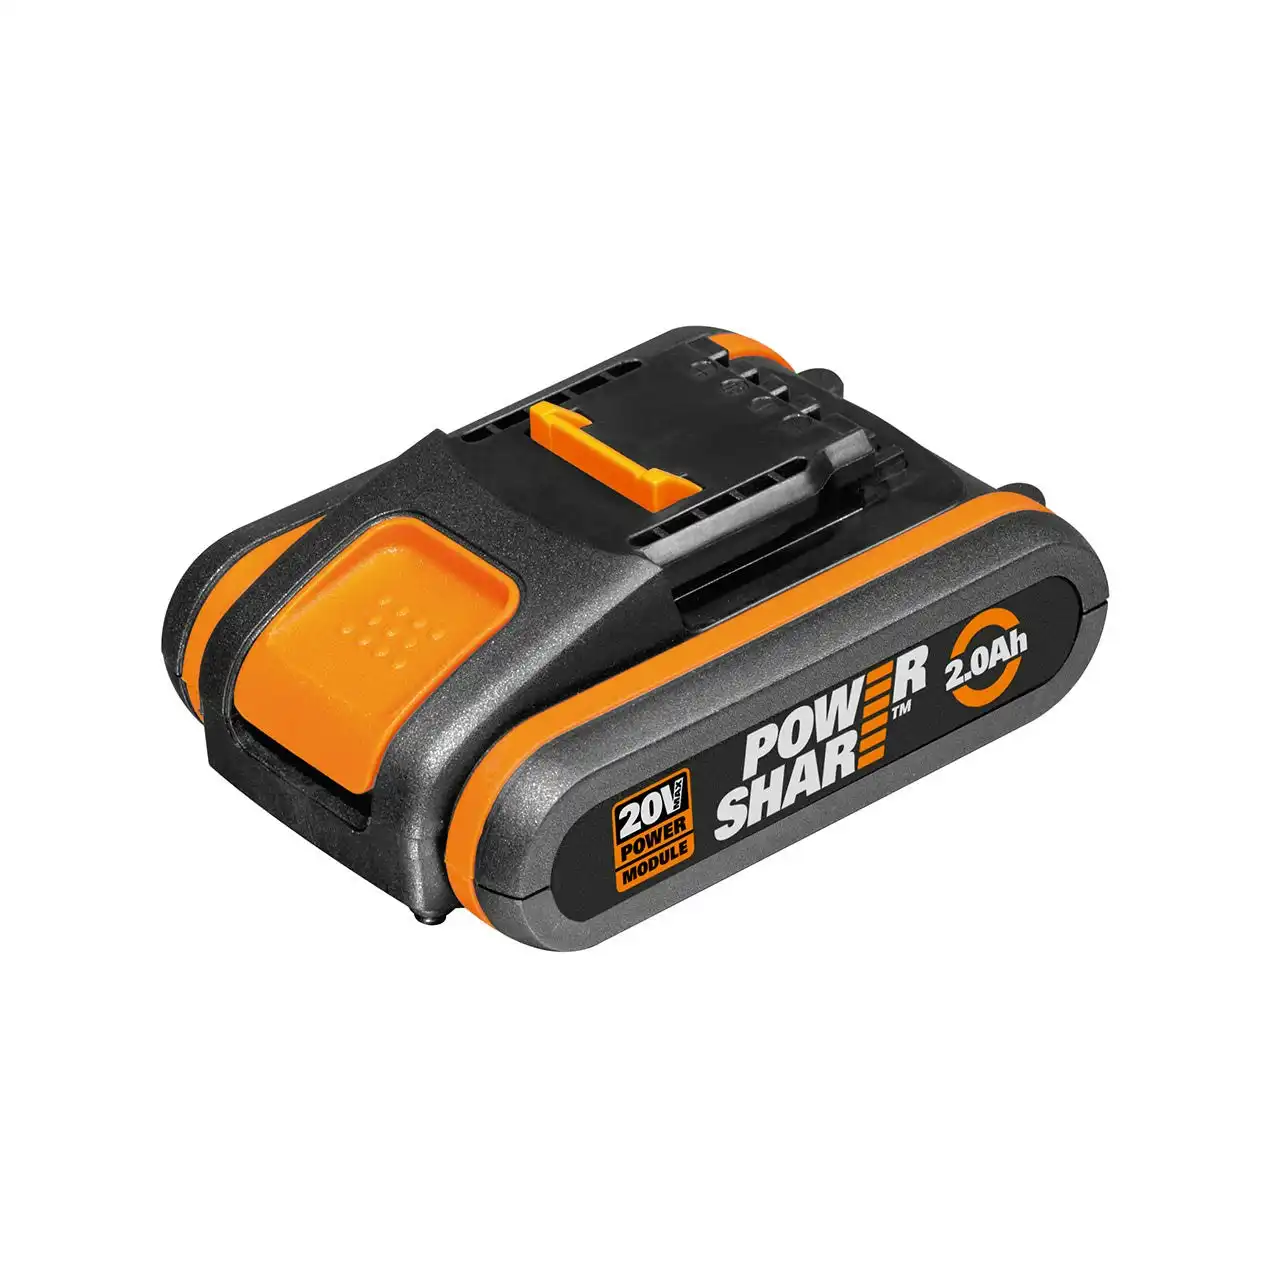 WORX Powershare  20v 2.0ah Max Lithium-ion Battery, With Battery Indicator